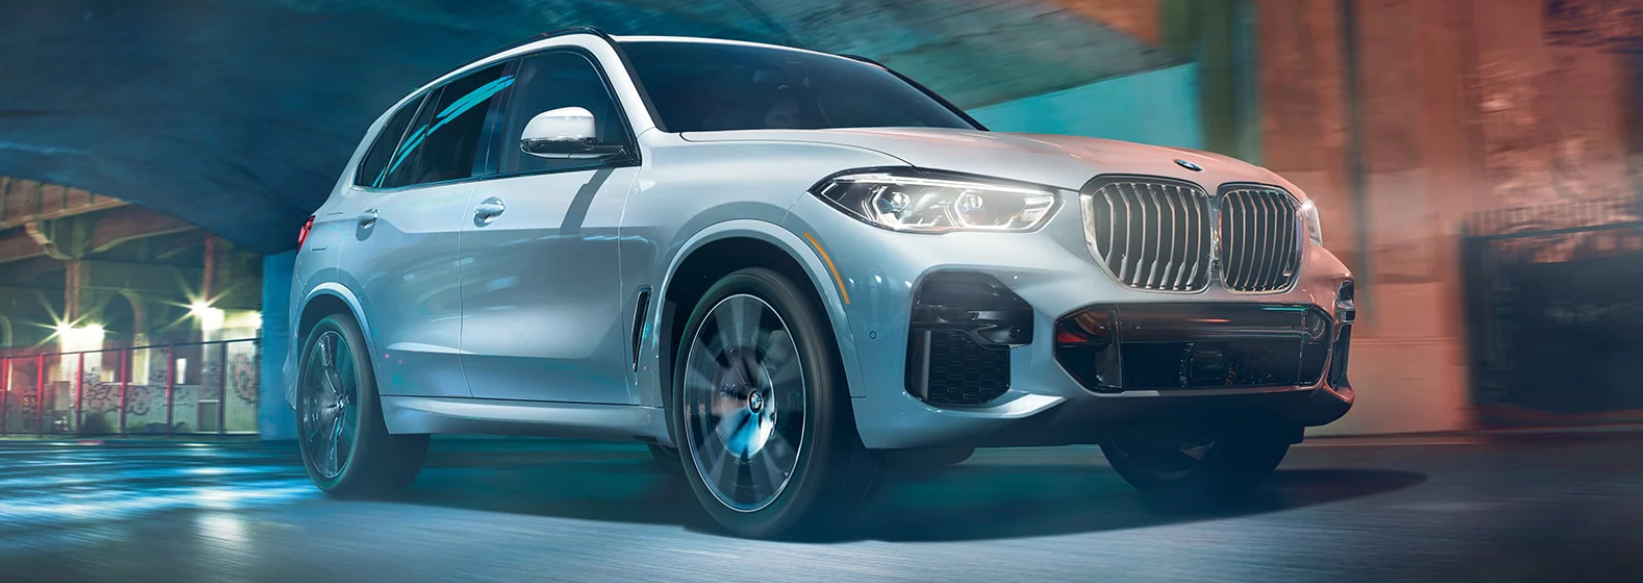 BMW X5 with white paint drive on a street entering a tunnel